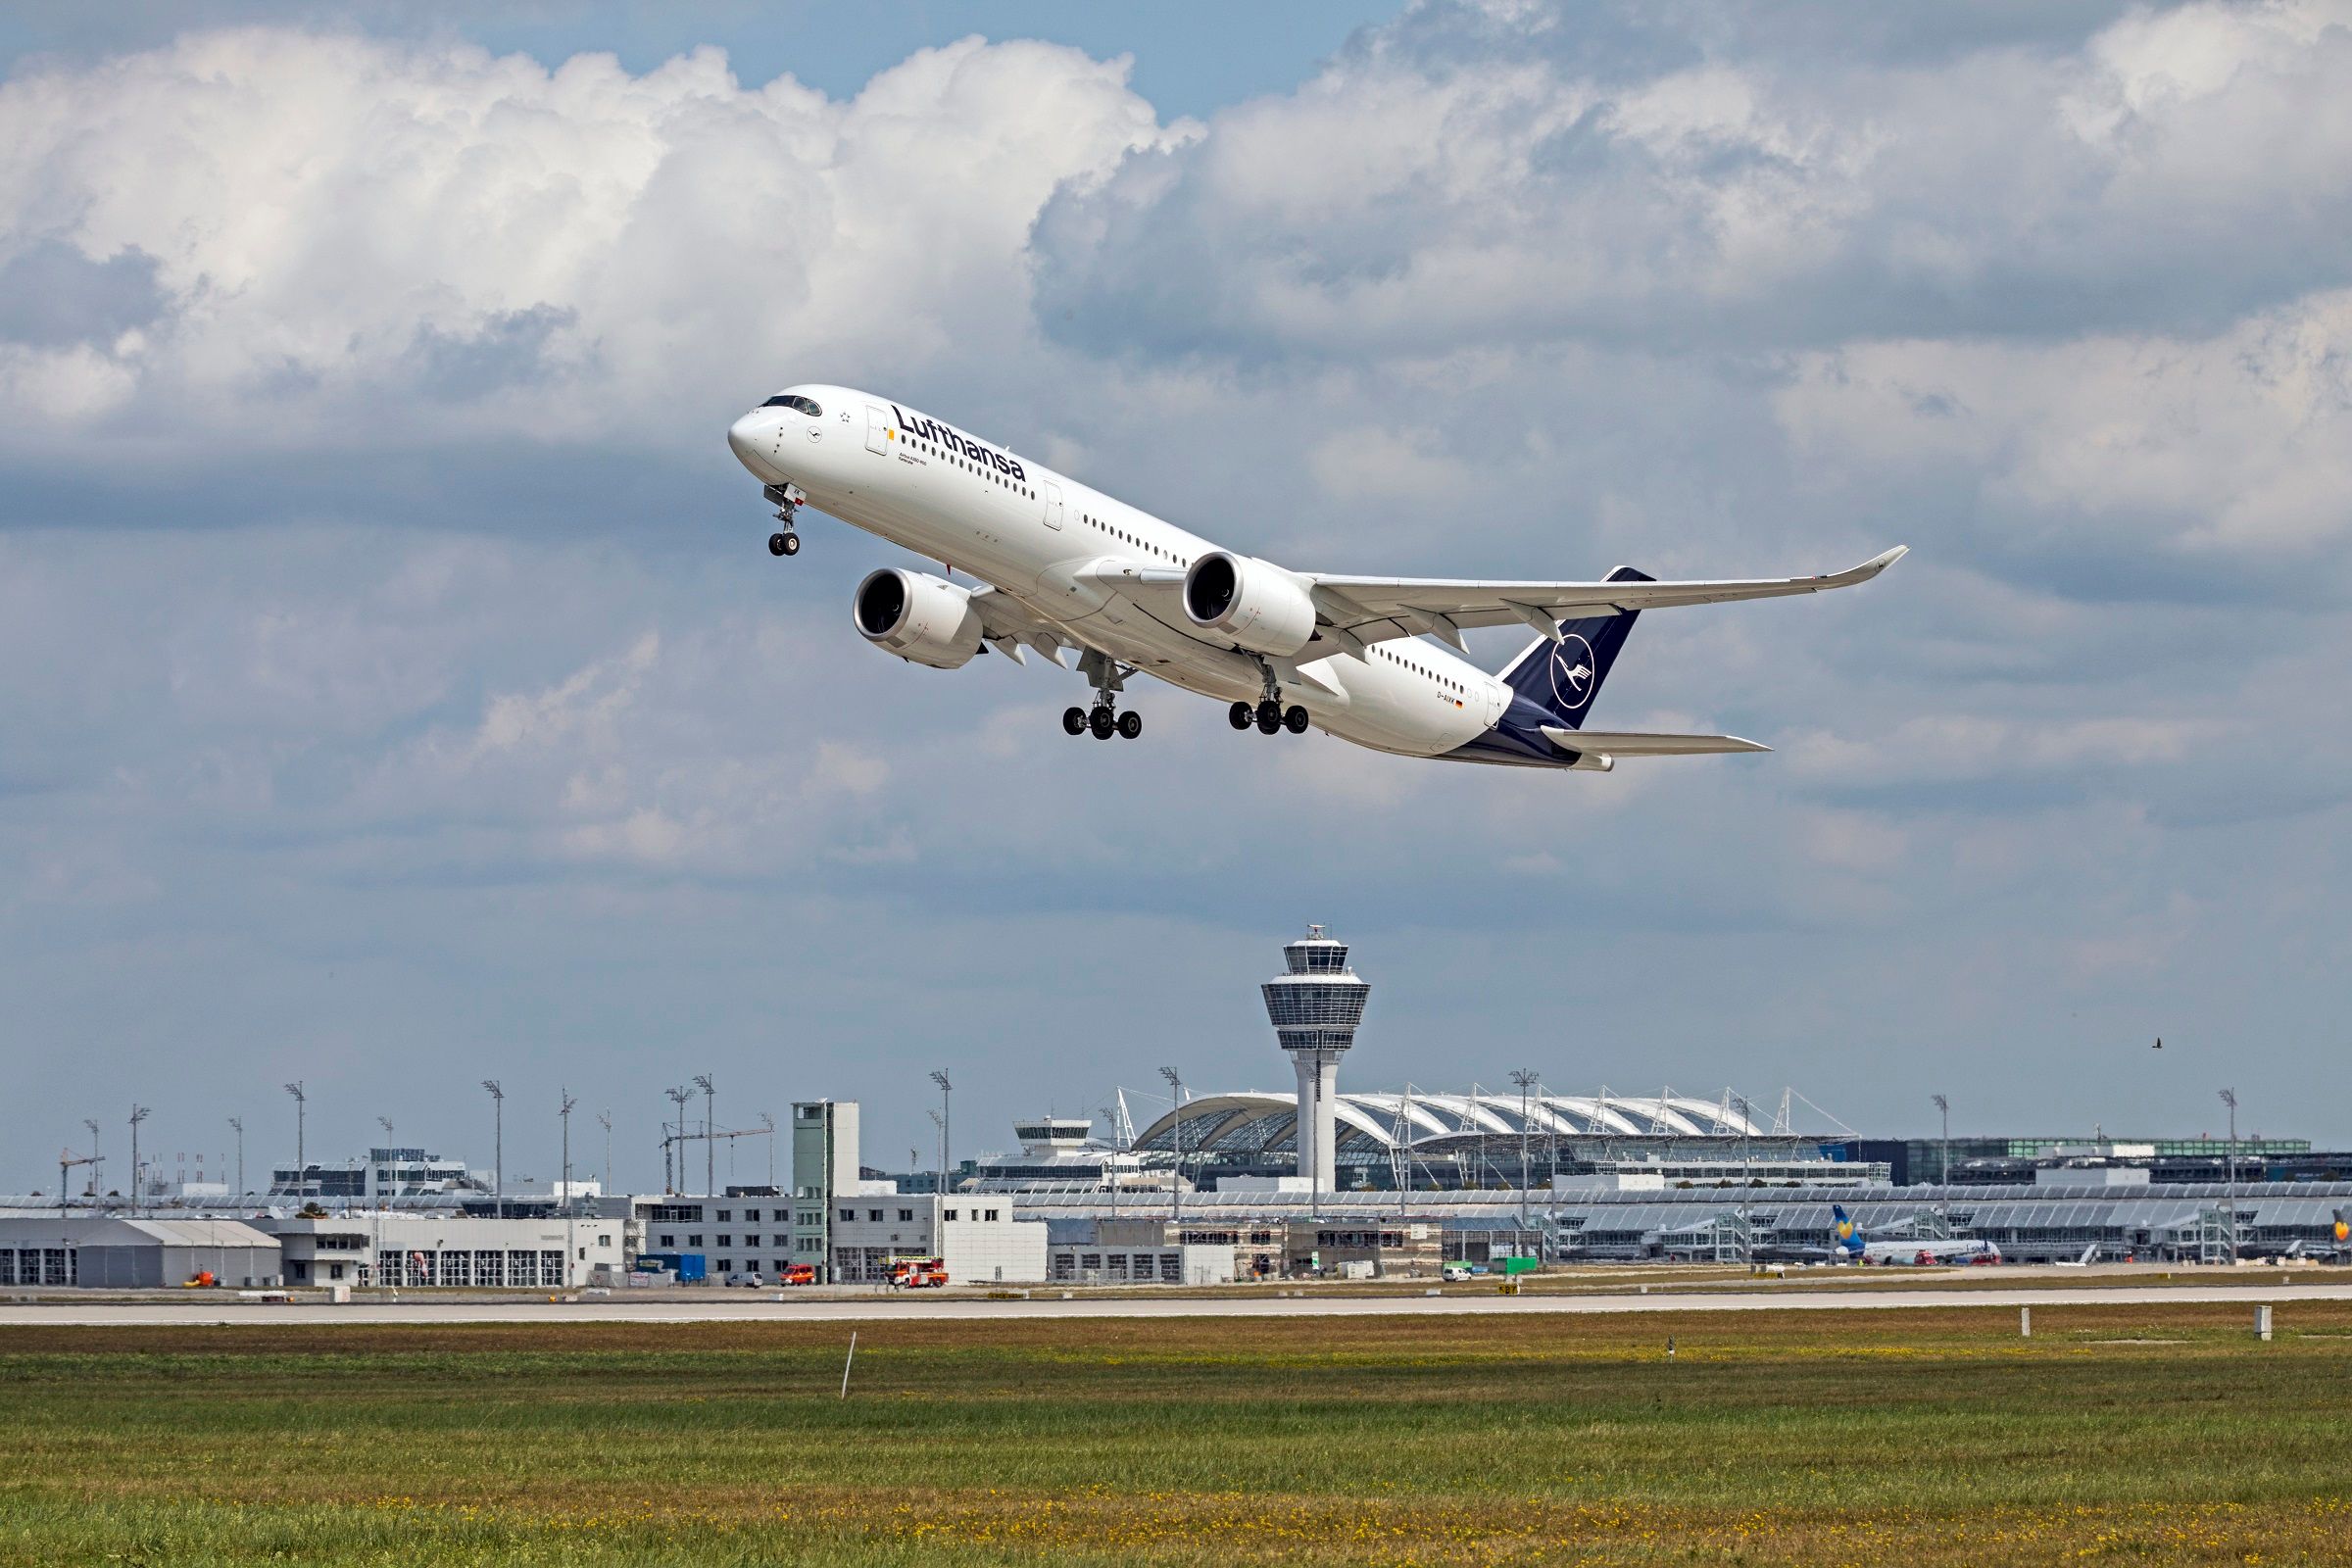 A Lufthansa Airbus A350 Taking off from Munich Airport.